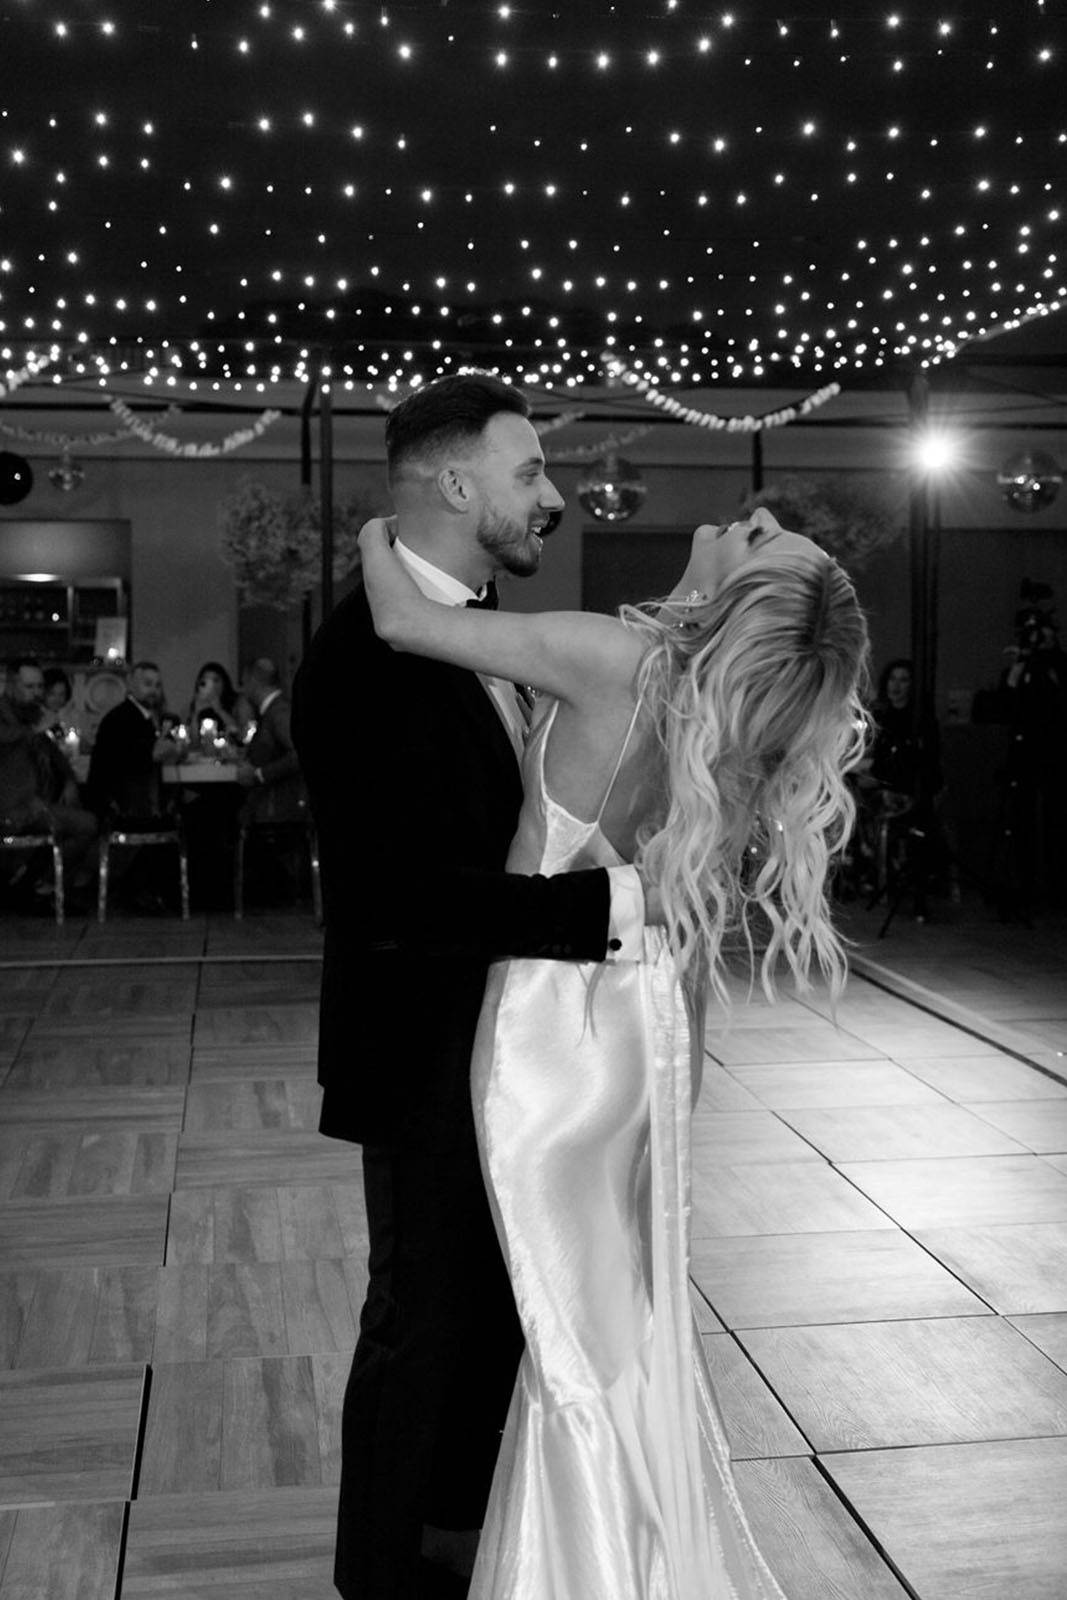 Bride and groom share a playful first dance